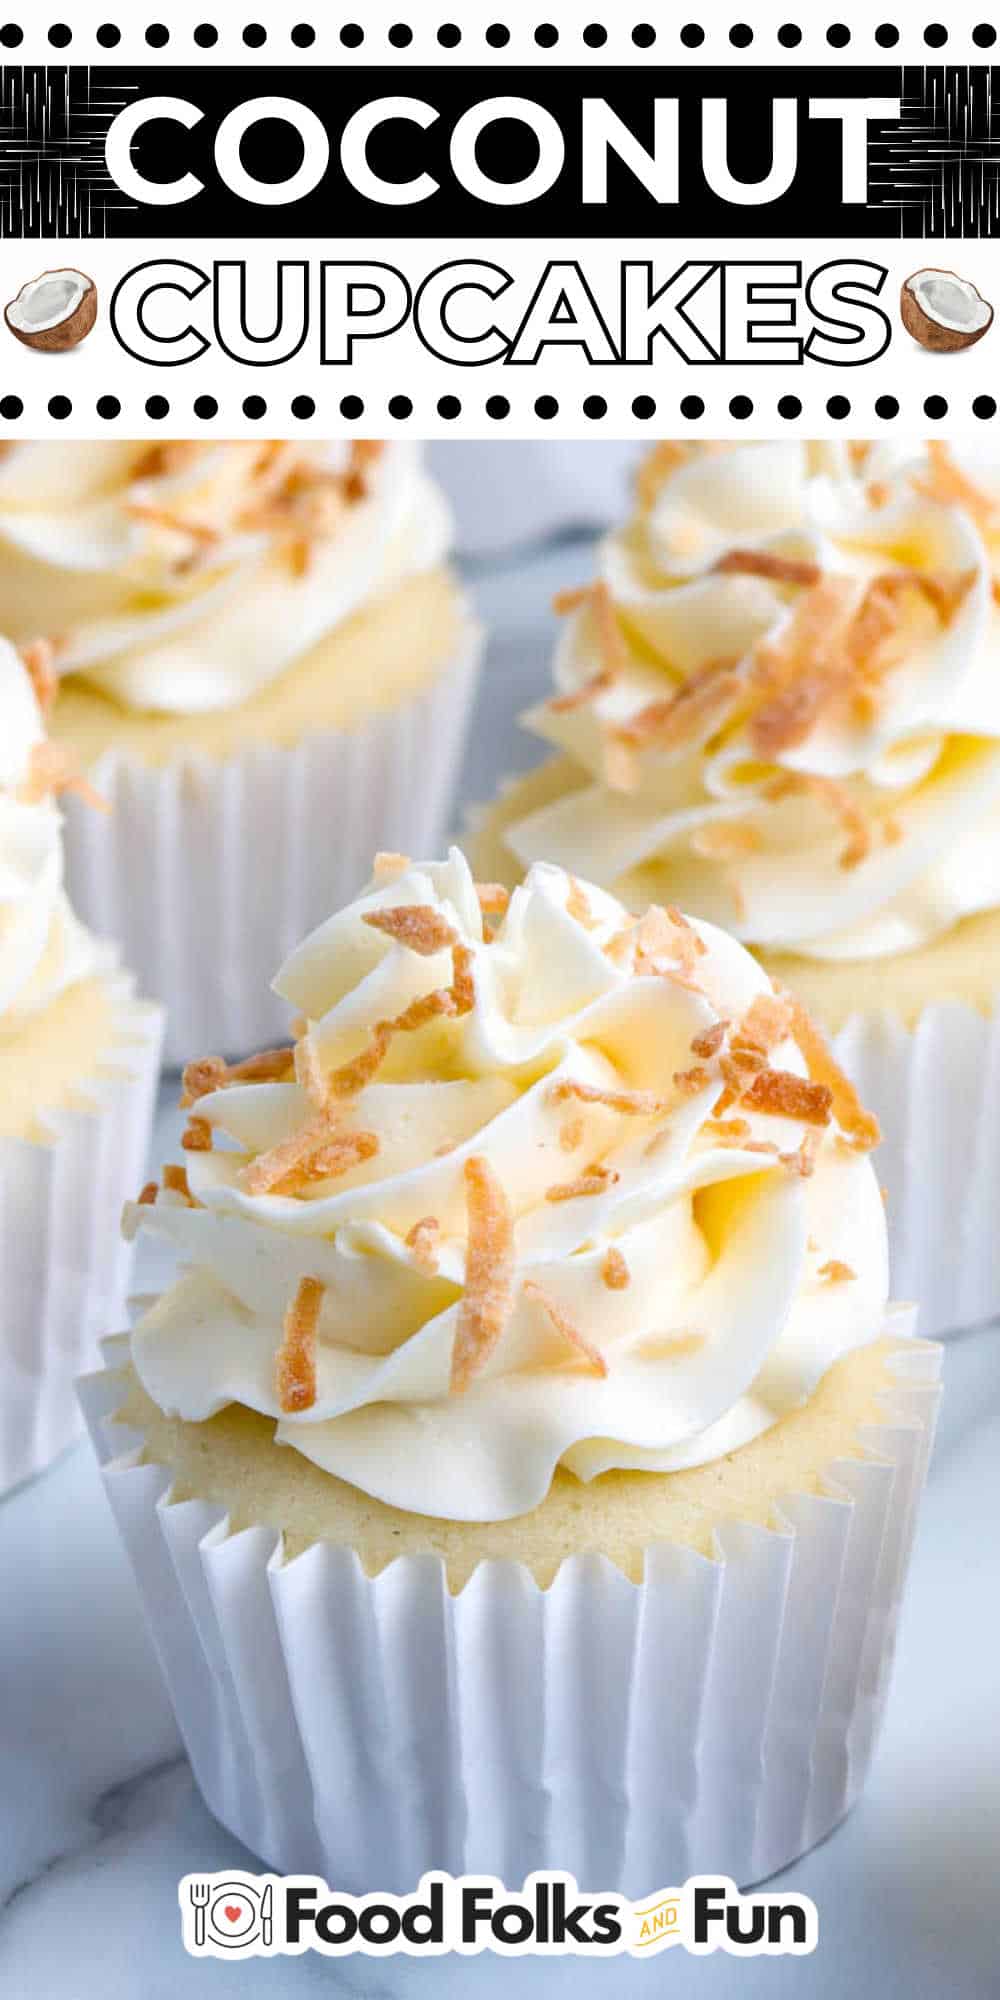 If you love coconut, these cupcakes are a dream come true. Crafted with toasted coconut flakes, velvety cream of coconut, and coconut extract, these cupcakes celebrate all things coconut. via @foodfolksandfun